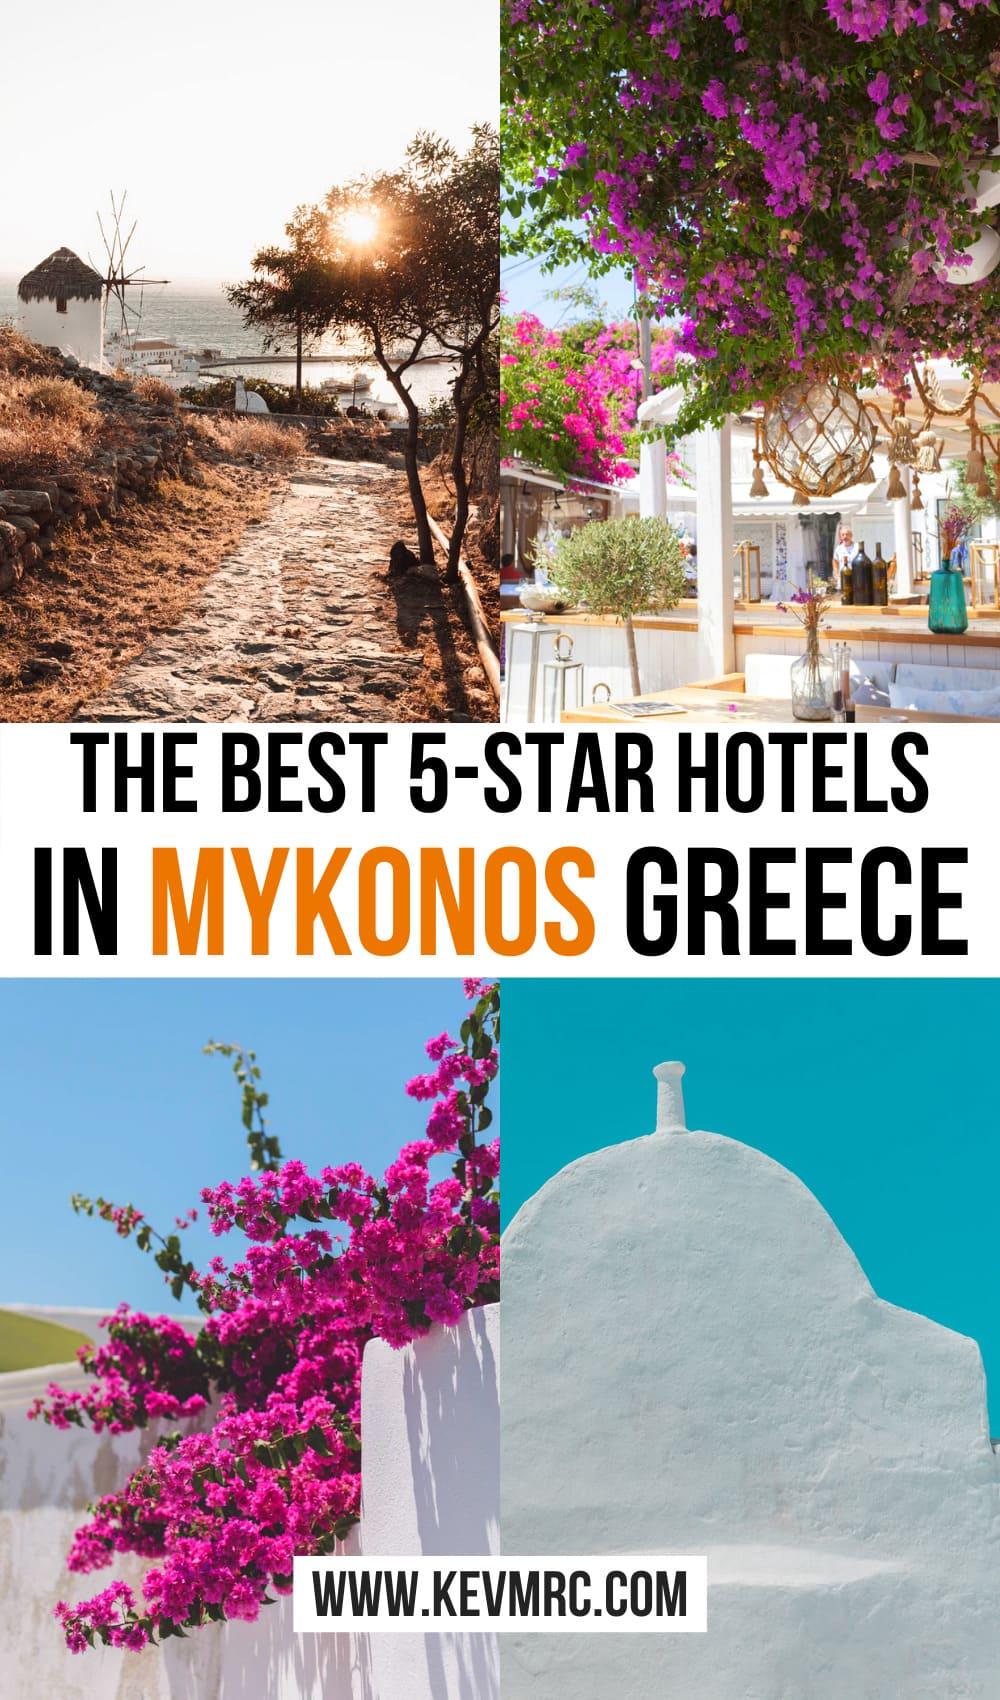 I've put together this list of the best 5 star hotels in Mykonos on the beach, the most comfortable and beautiful places that will offer you the most unique experience with a direct access to the beach. mykonos luxury hotels | best mykonos hotels | mykonos hotel | mykonos greece hotels | mykonos greece hotels luxury | mykonos villas luxury